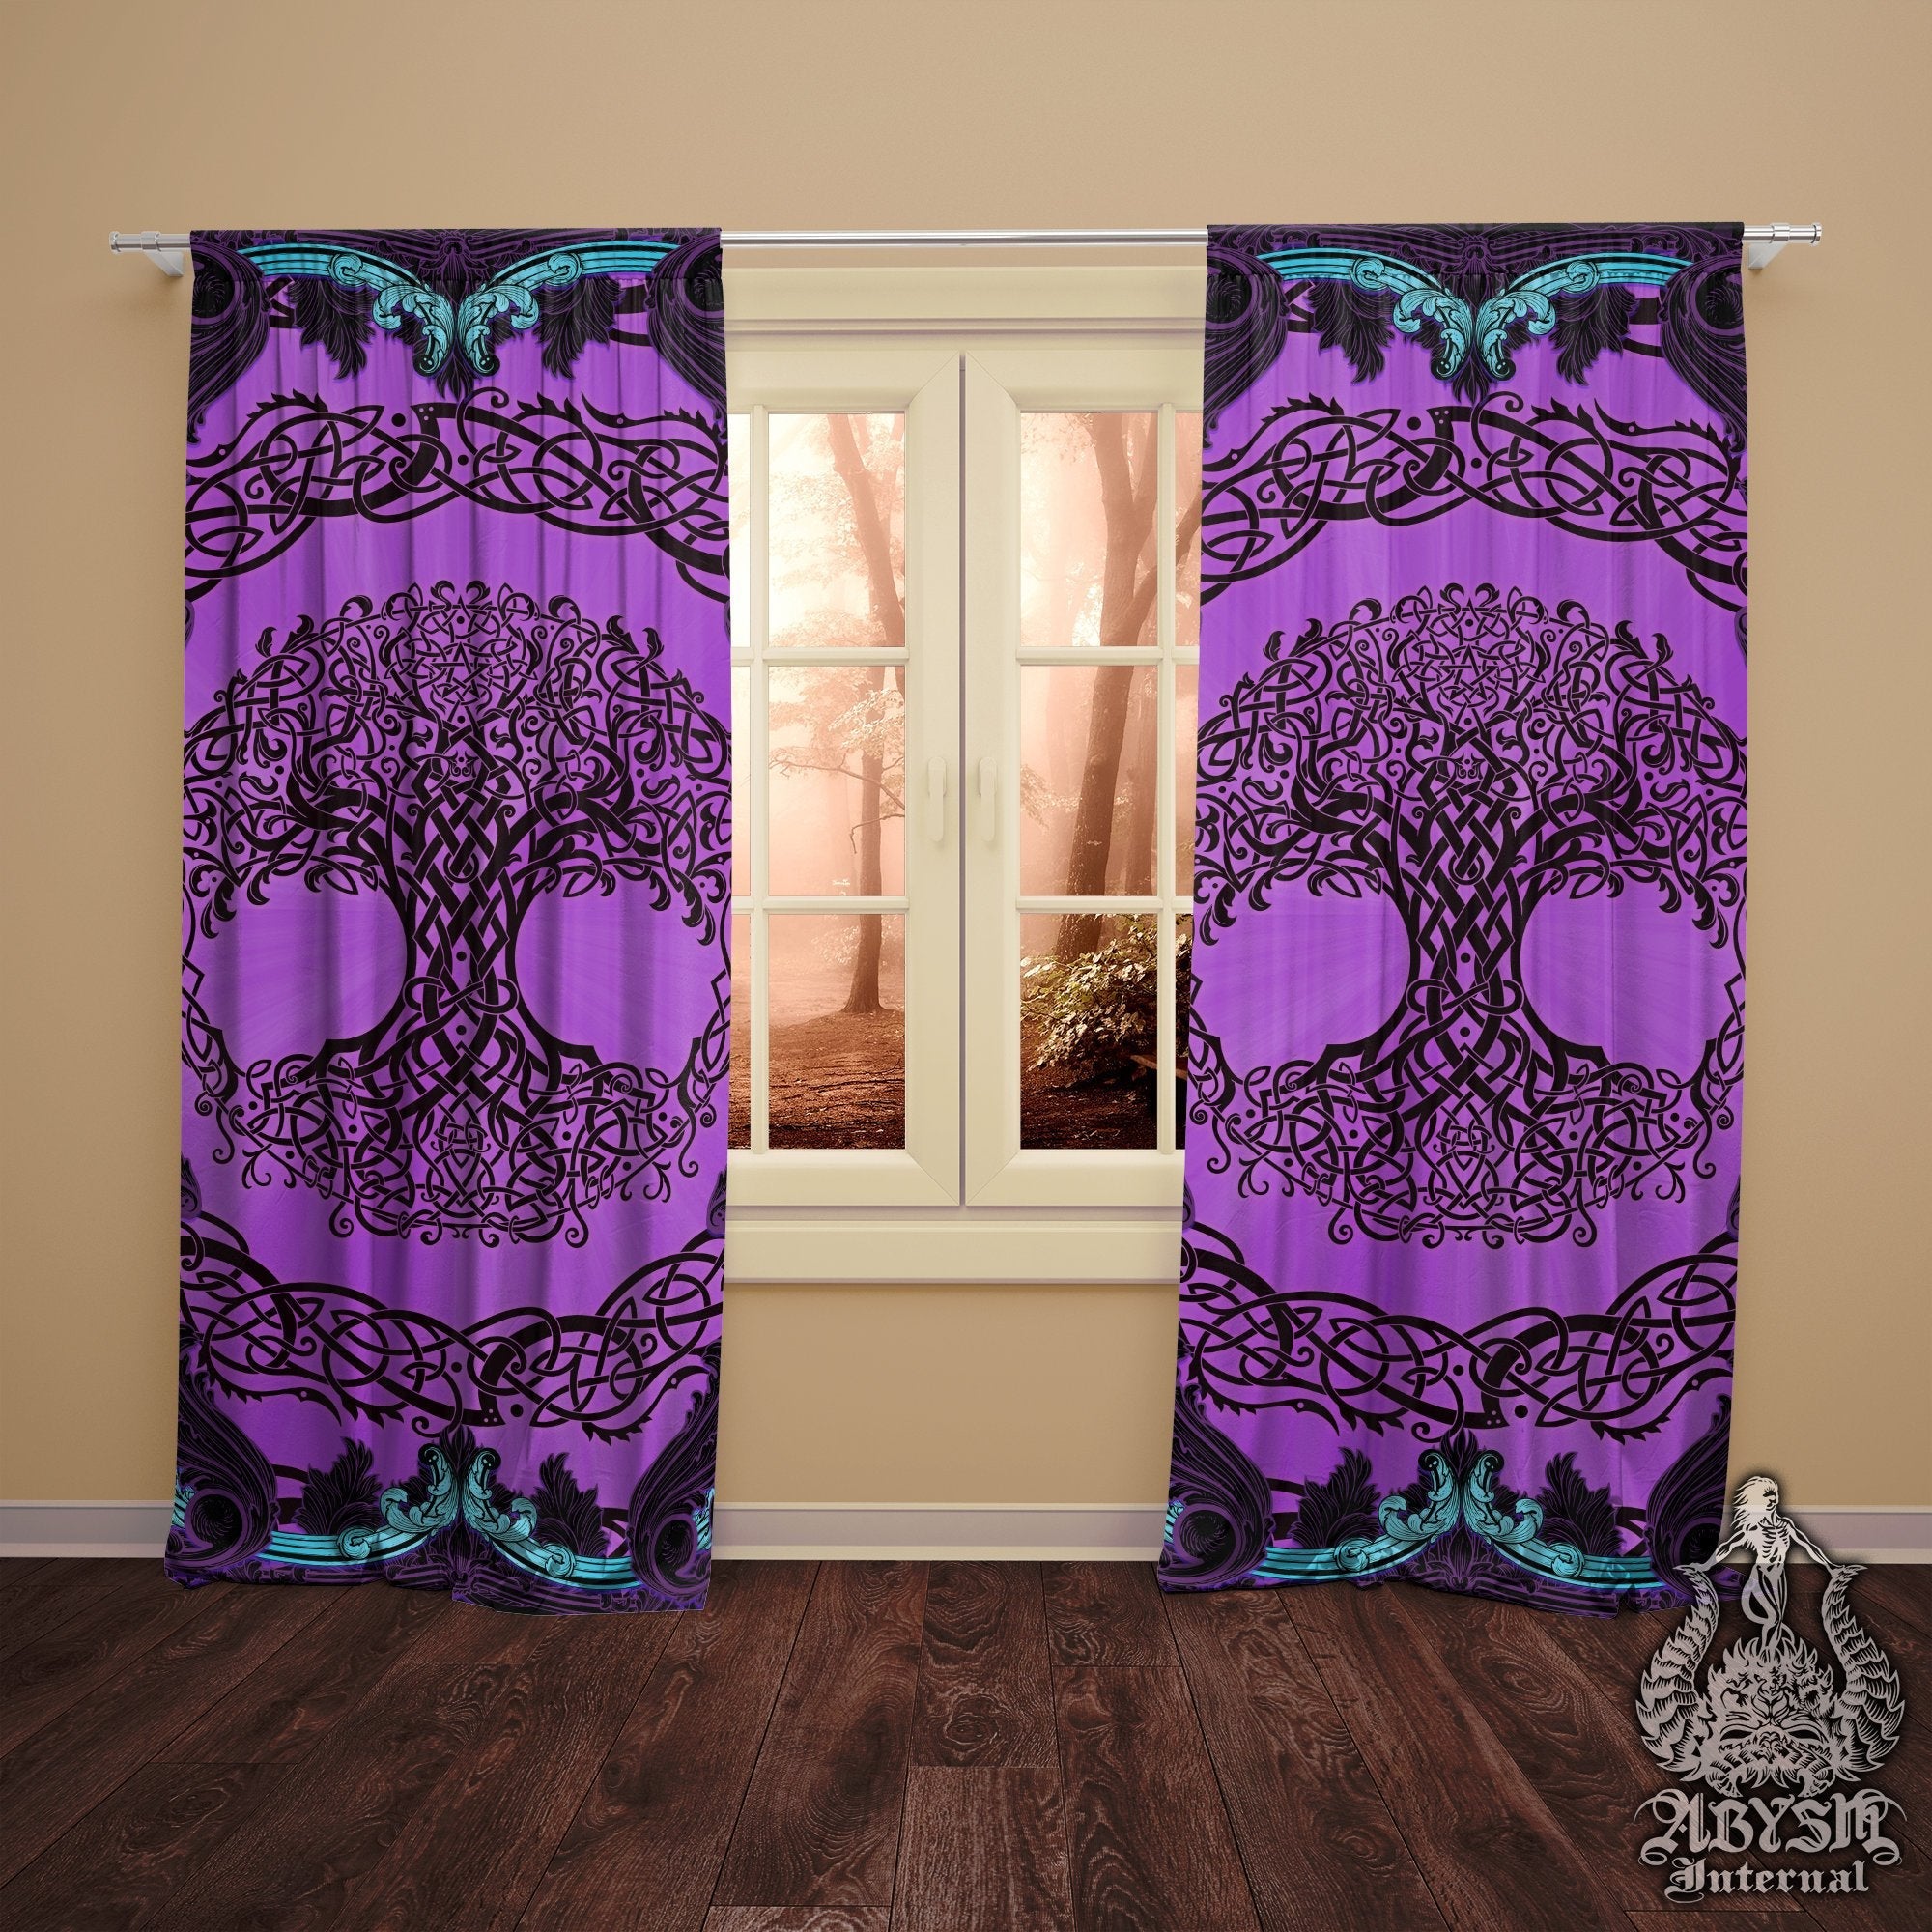 Witchy Blackout Curtains, Long Window Panels, Tree of Life, Celtic Knot, Pagan Room Decor, Art Print, Funky and Eclectic Home Decor - Pastel Goth - Abysm Internal